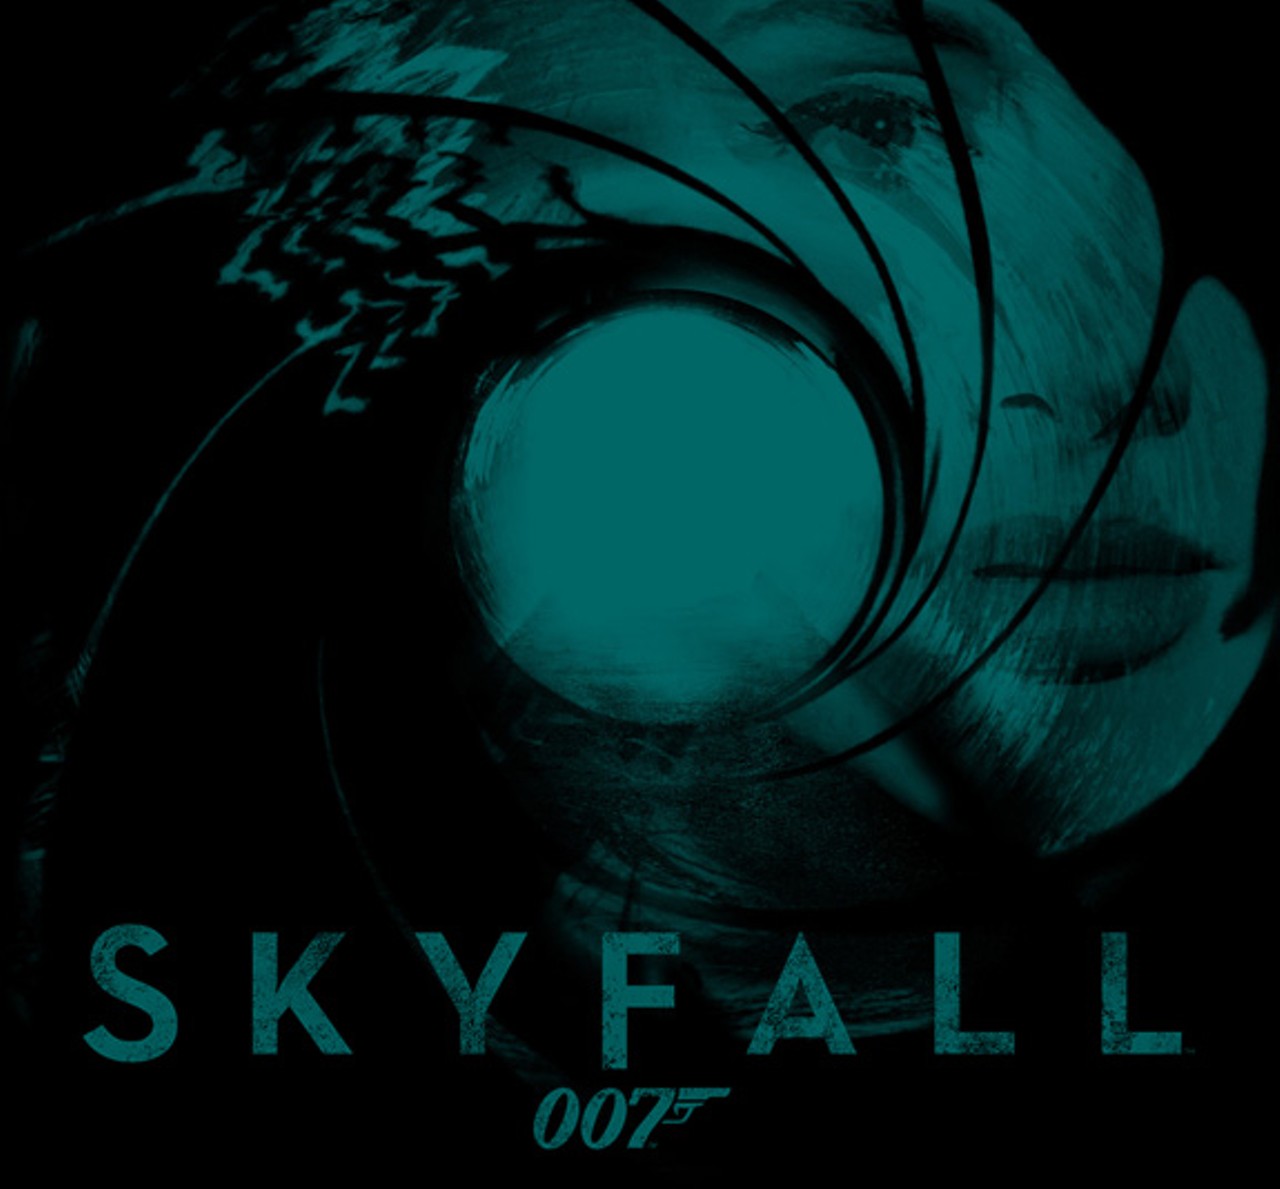 "Skyfall" from Skyfall, Music and Lyric by Adele Adkins and Paul Epworth, for the Oscar for Music Written for Motion Pictures, Original Song
Also Nominated: 
"Before My Time" from Chasing Ice, Music and Lyric by J. Ralph
"Everybody Needs A Best Friend" from Ted, Music by Walter Murphy; Lyric by Seth MacFarlane
"Pi's Lullaby" from Life of Pi, Music by Mychael Danna; Lyric by Bombay Jayashri
"Suddenly" from Les Miserables, Music by Claude-Michel Sch&ouml;nberg; Lyric by Herbert Kretzmer and Alain Bulbul
Read our review of Skyfall